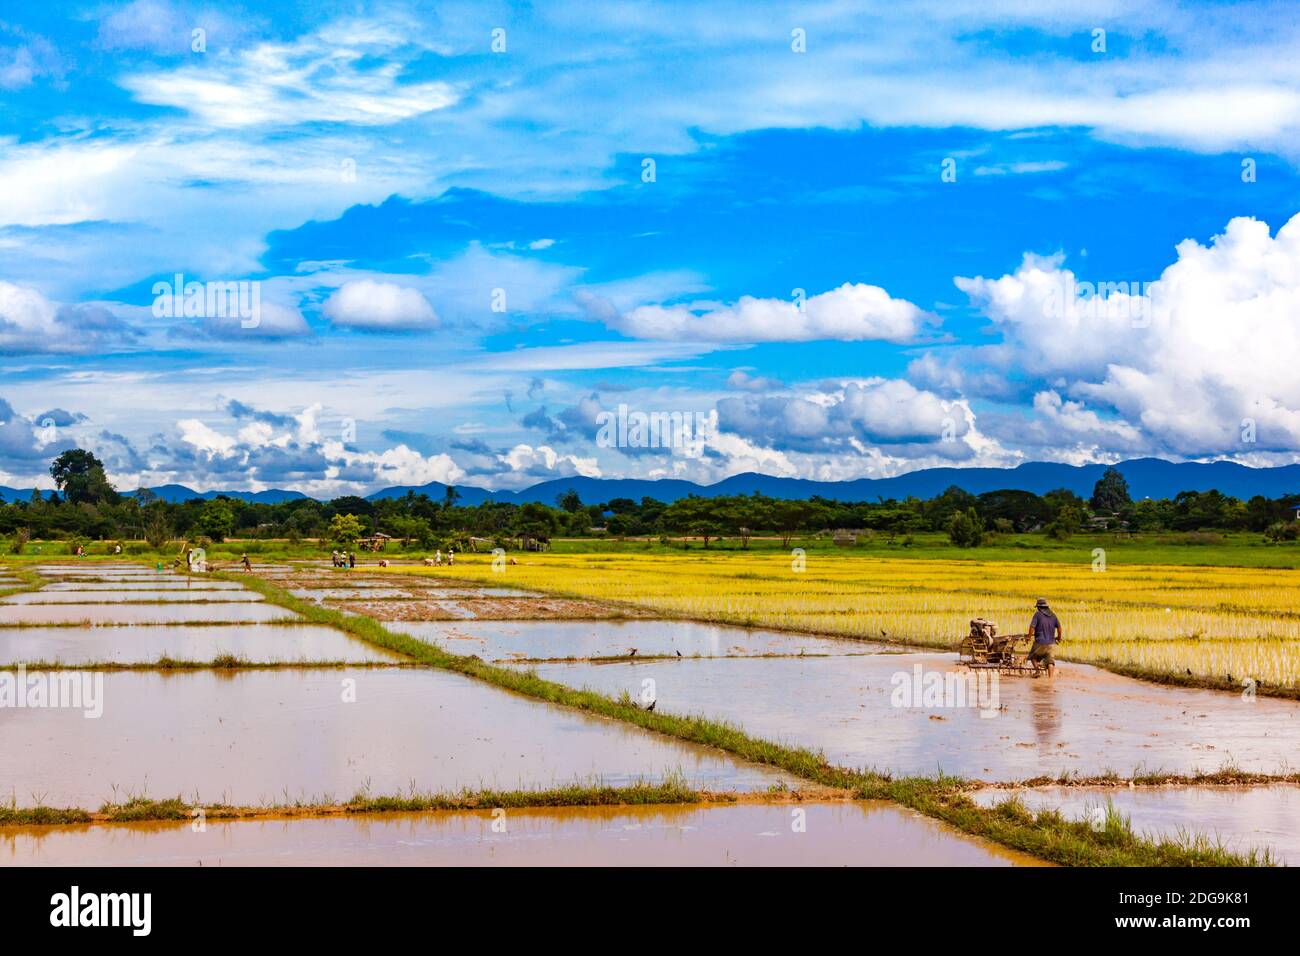 Thai farmers working in the paddy field Stock Photo